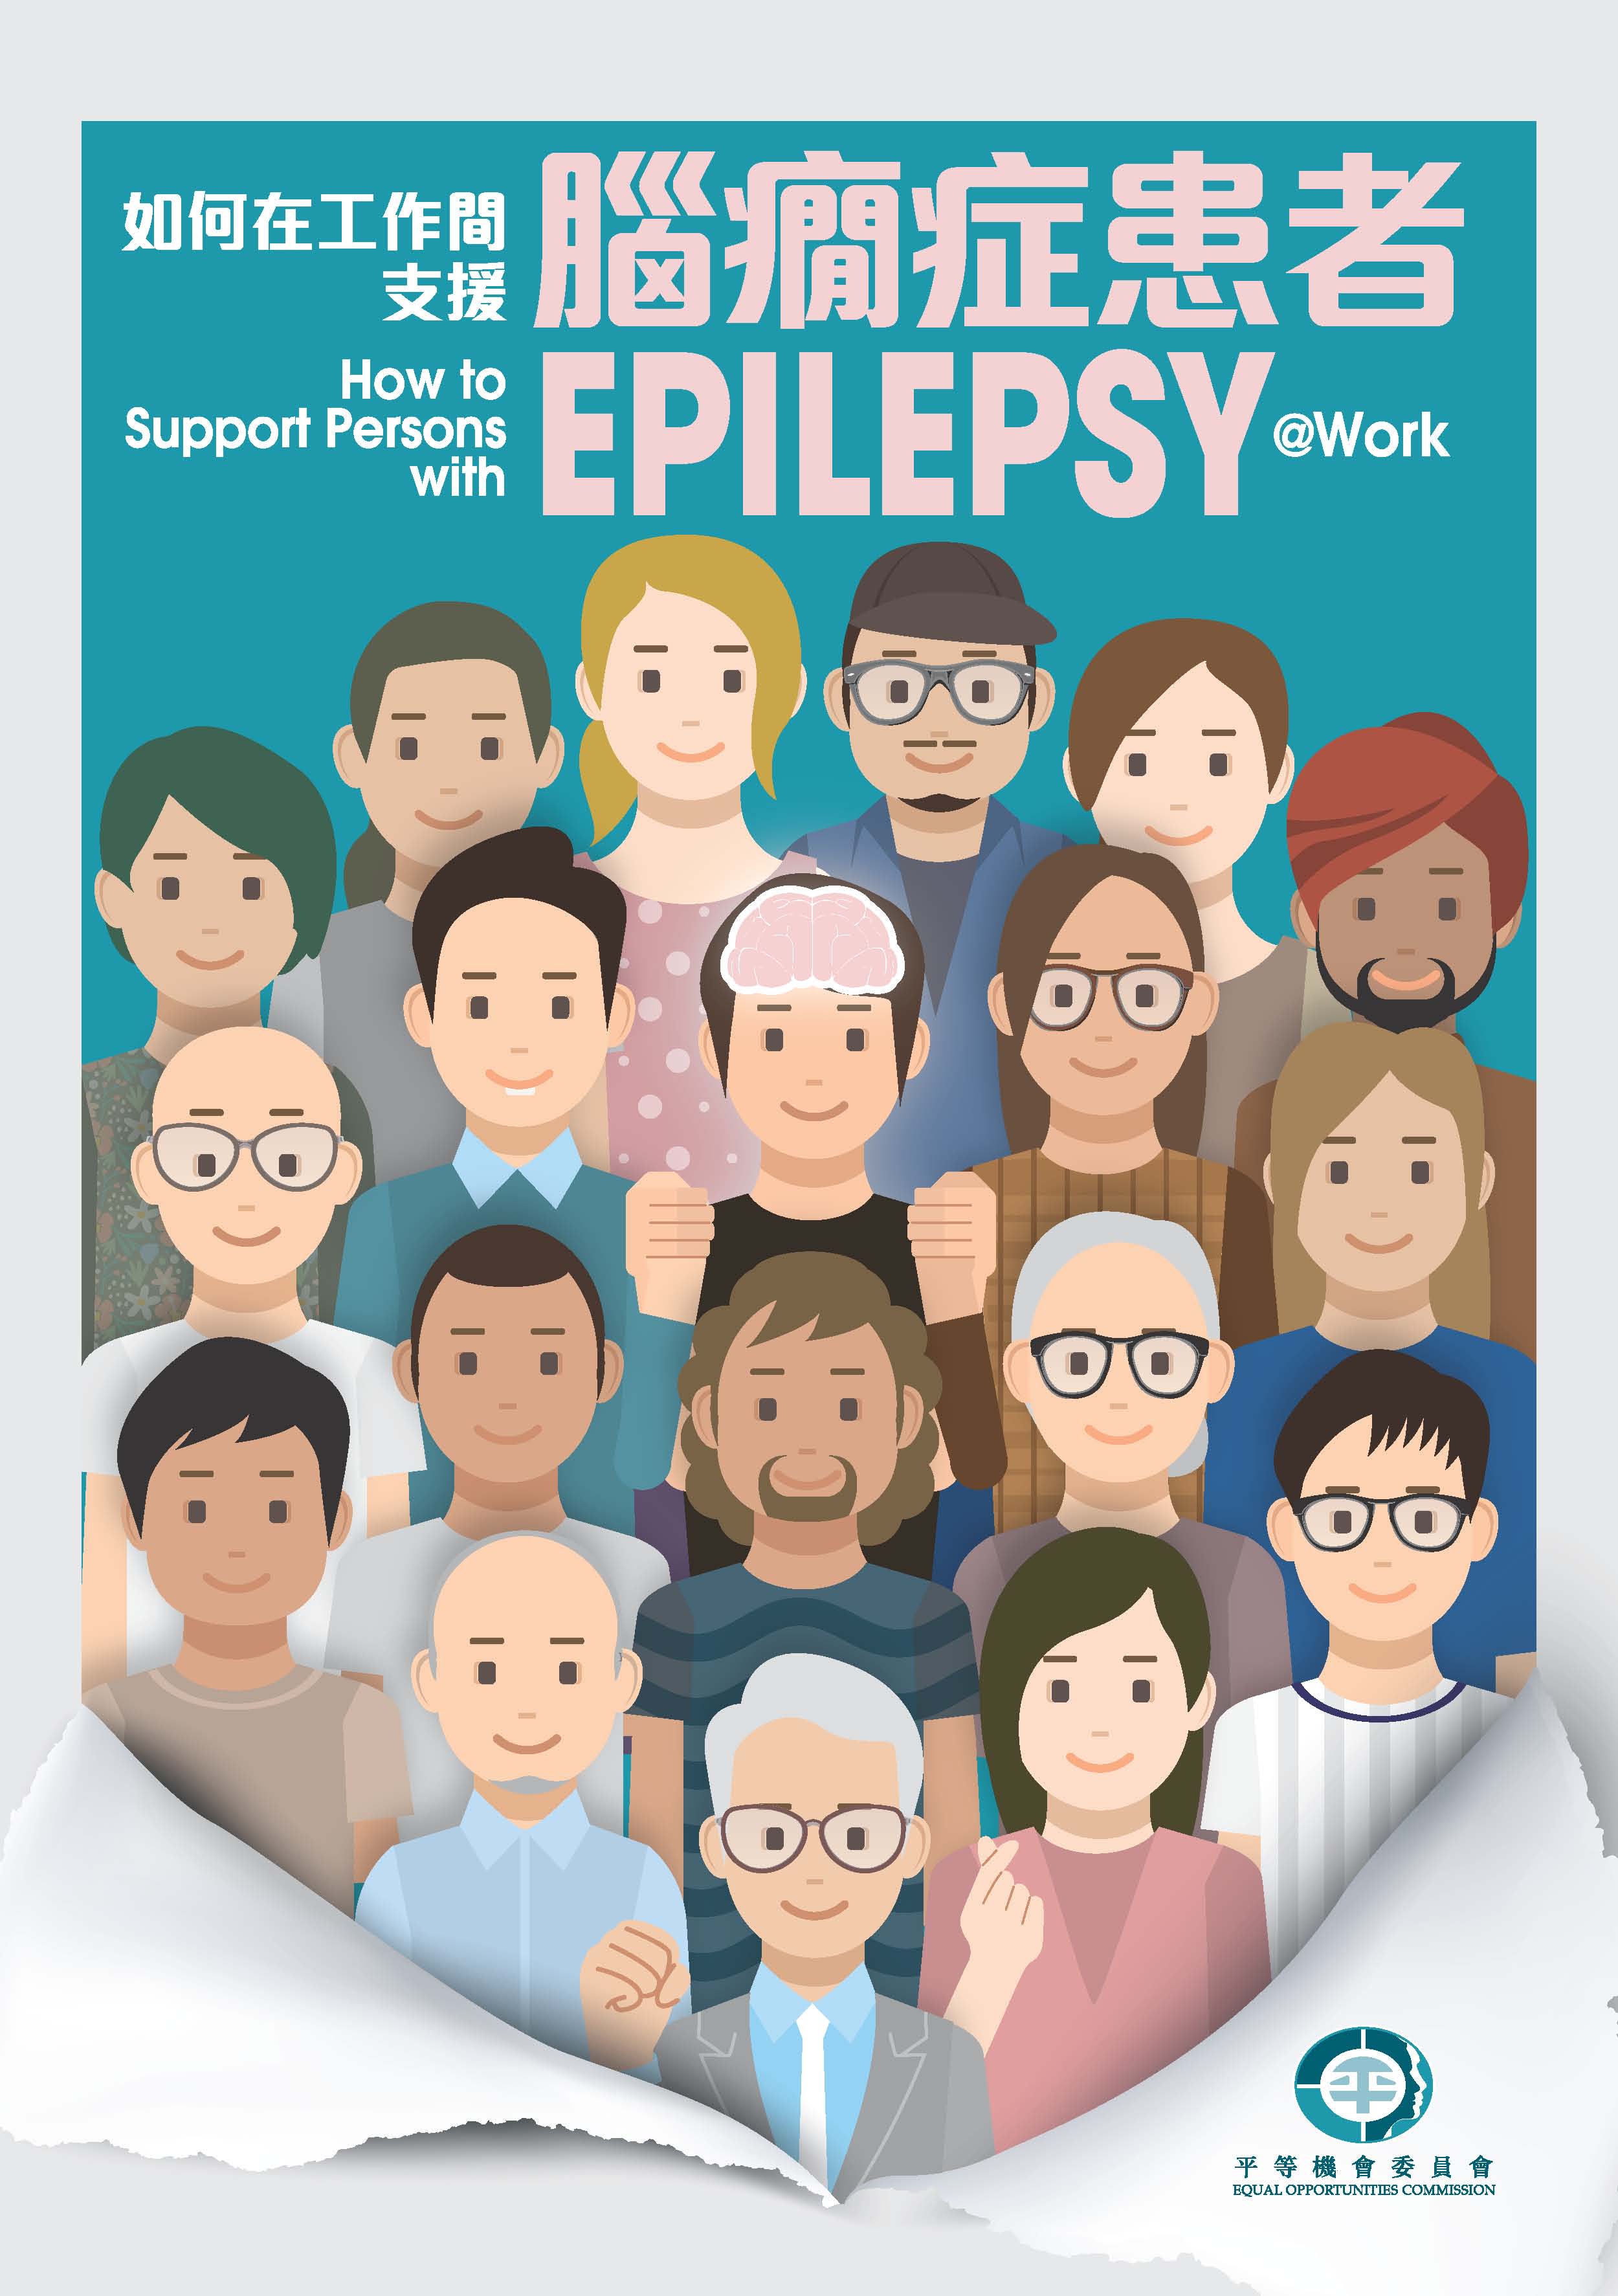 How to Support Persons with Epilepsy at Work